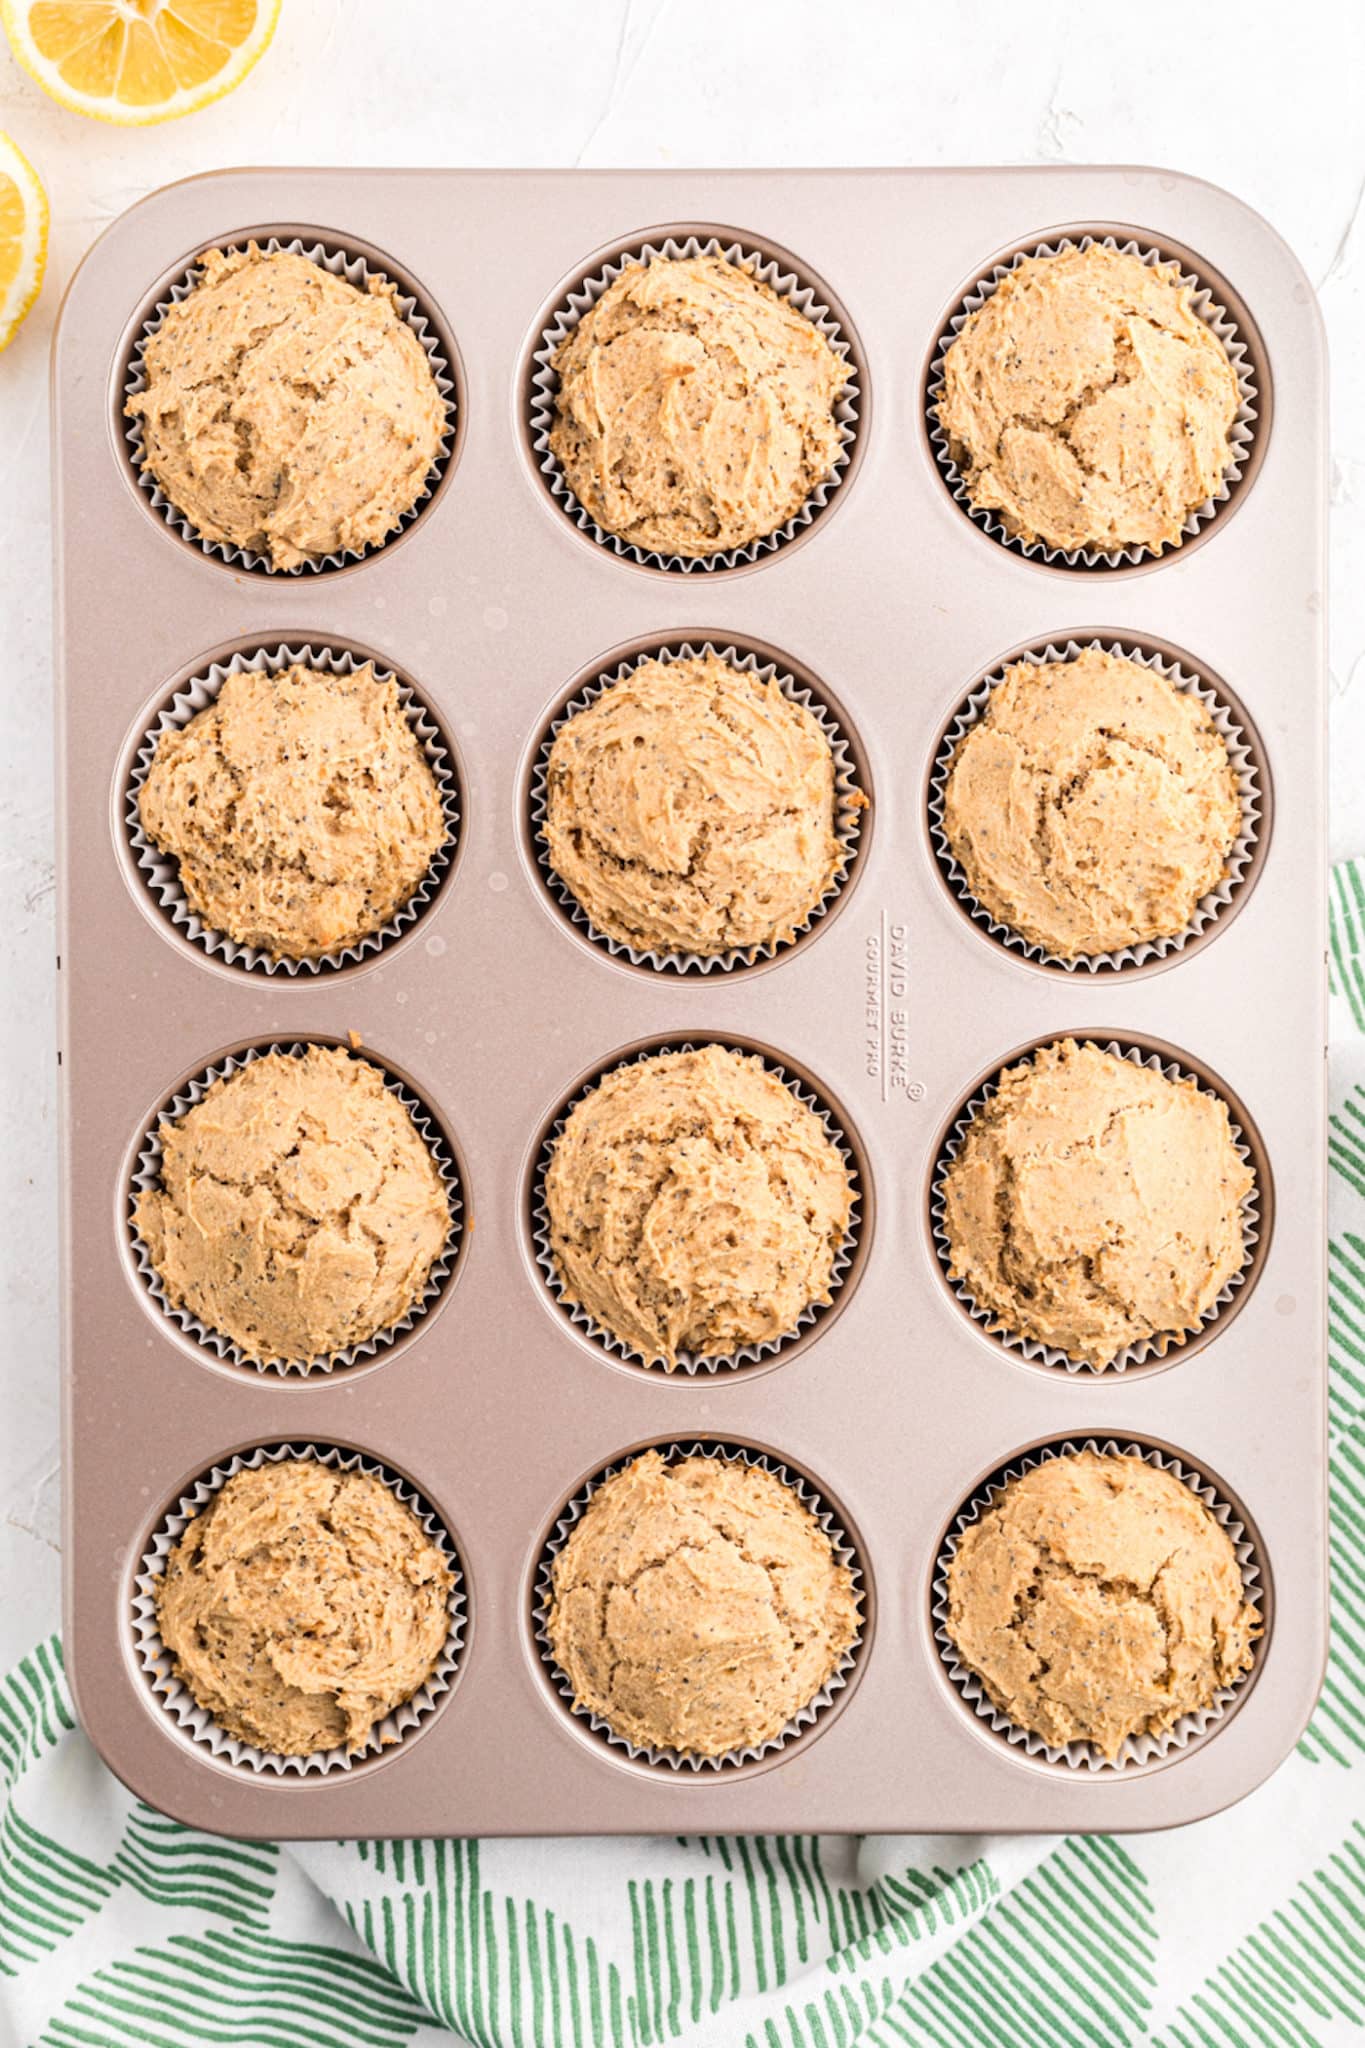 Top view of baked vegan lemon poppy seed muffins in a metal muffin pan.